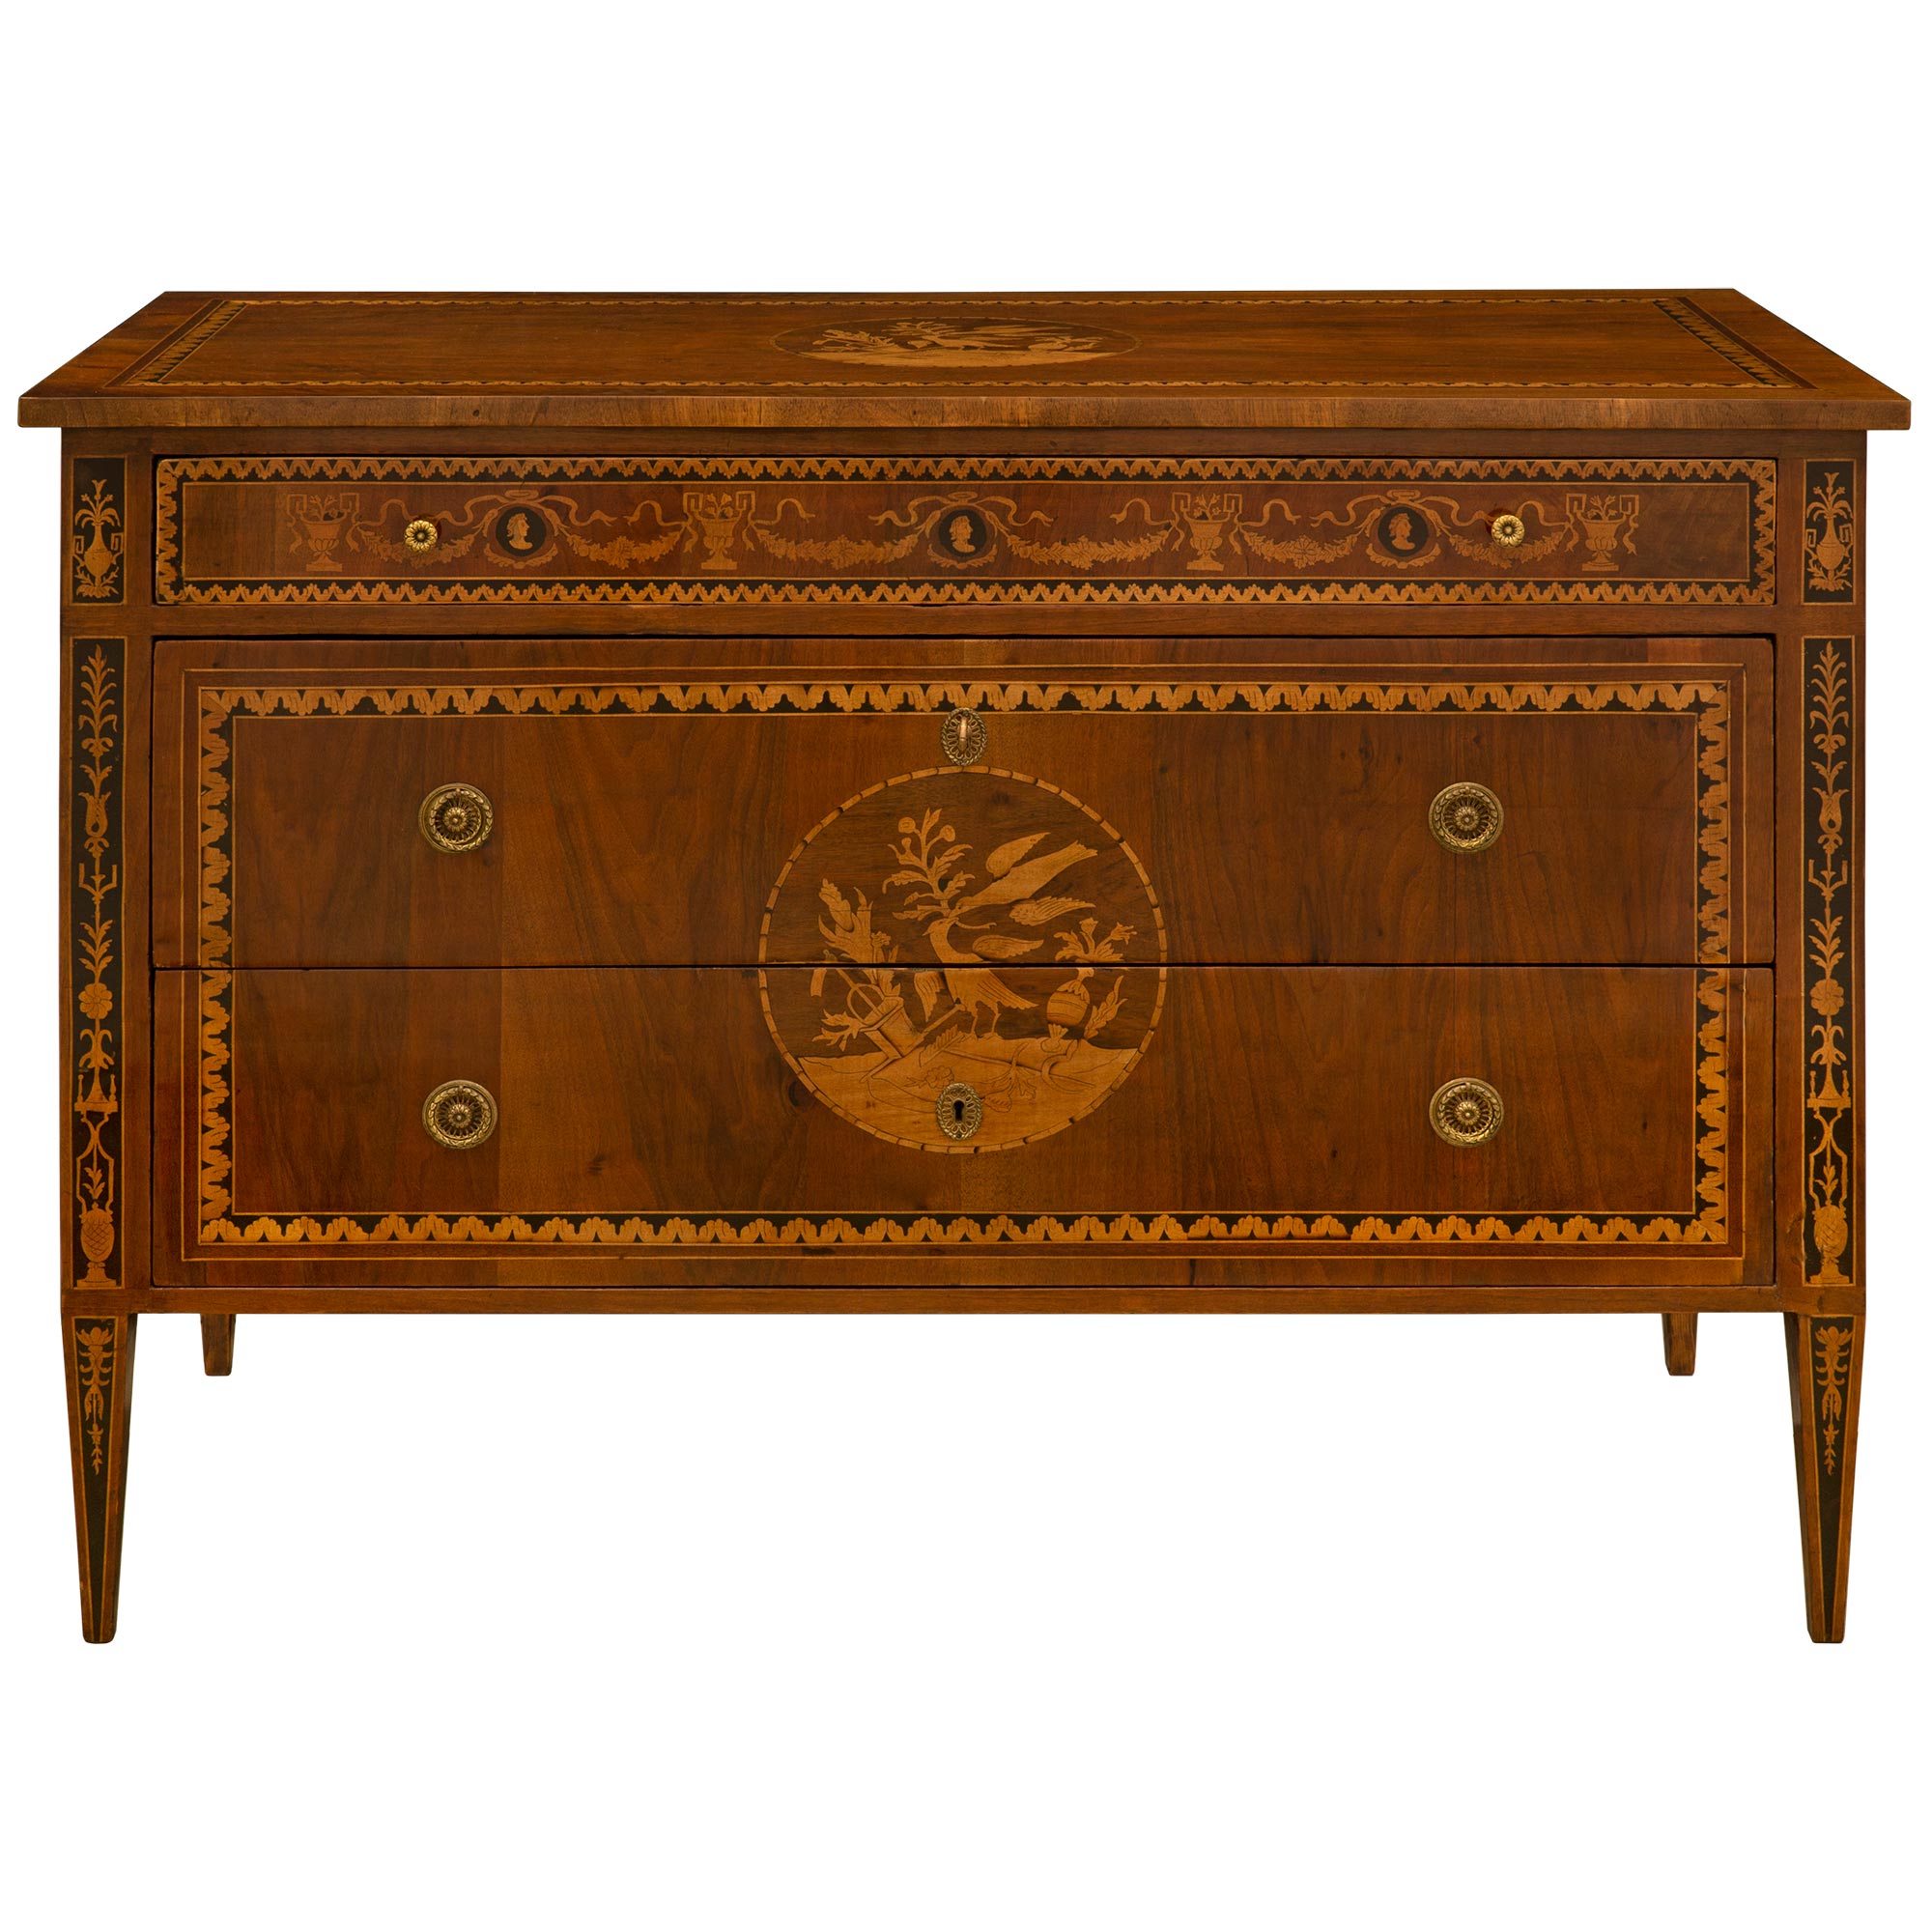 Italian 18th Century Louis XVI Period Walnut and Tulipwood Marquetry Commode For Sale